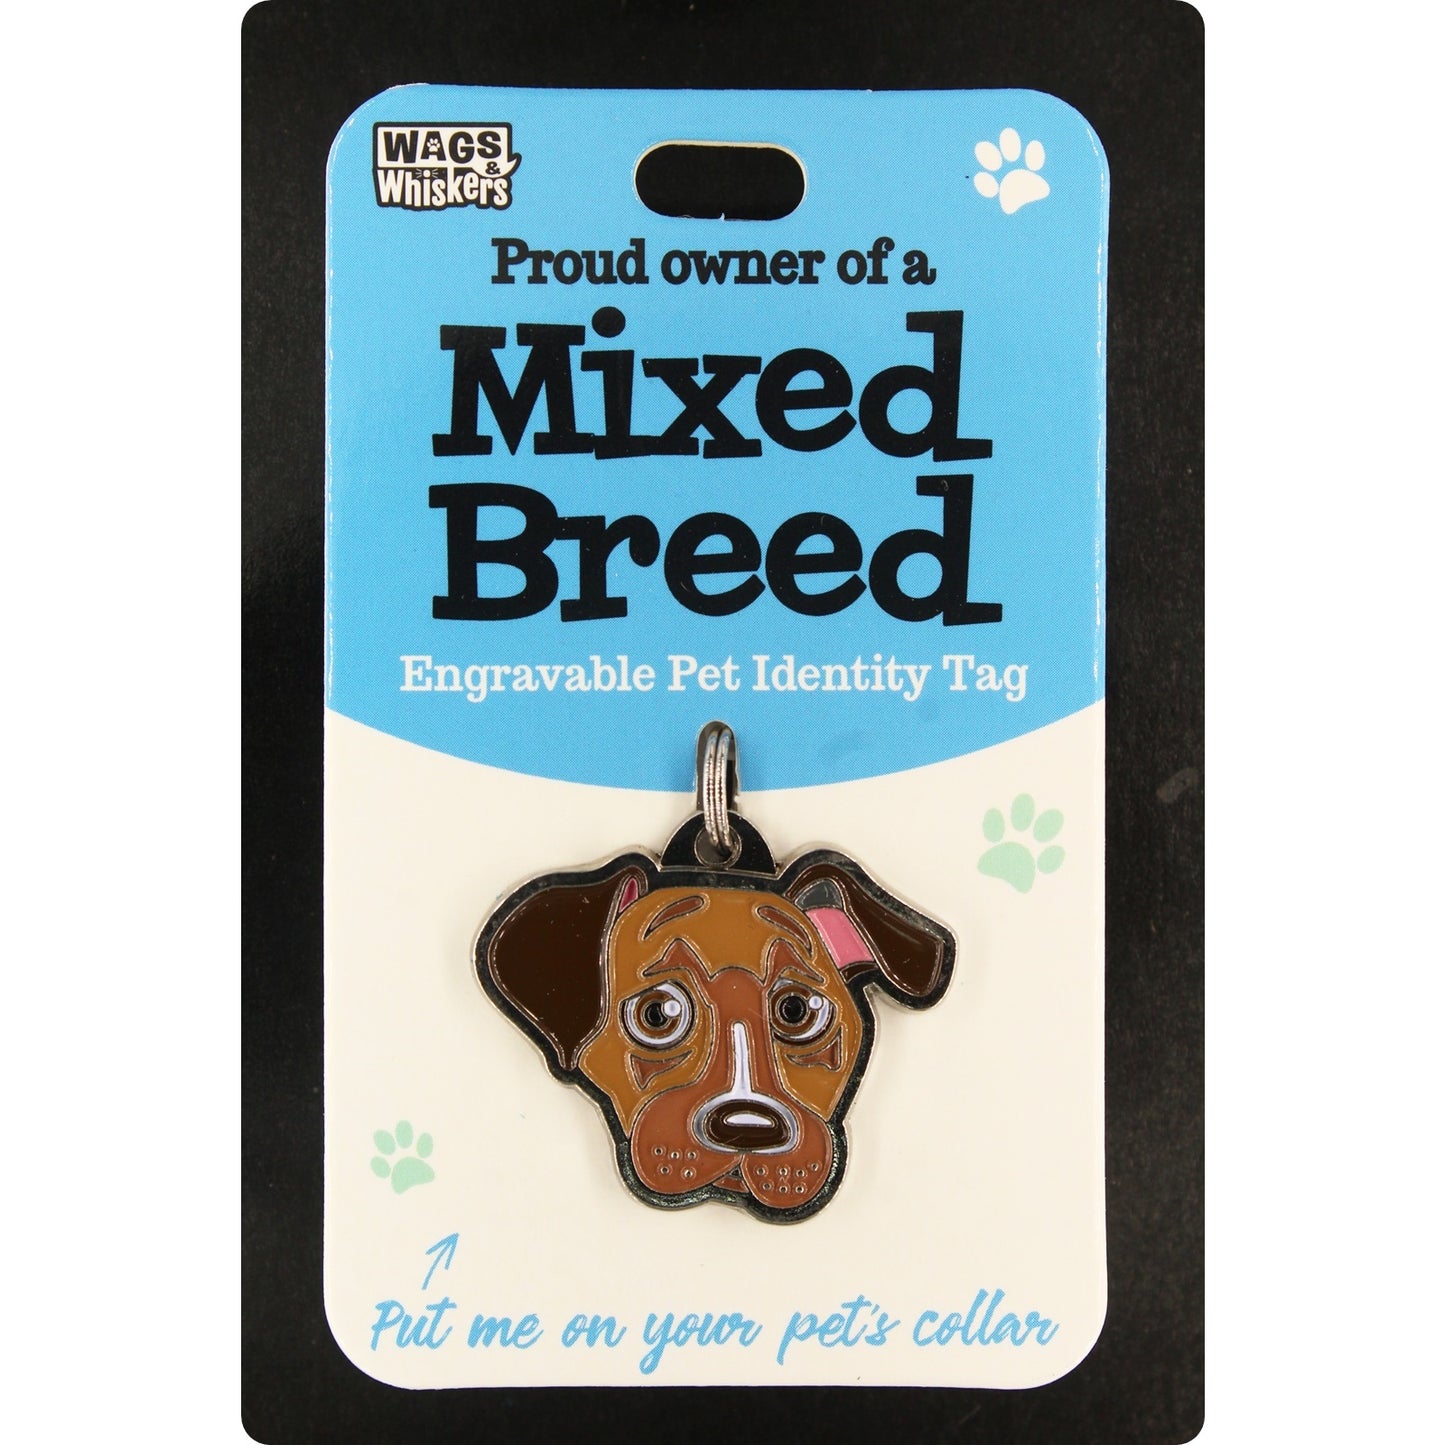 DESIRABLE GIFTS MIXED BREED WAGS & WHISKERS DOG PET TAG I CAN NOT ENGRAVE THIS ITEM?